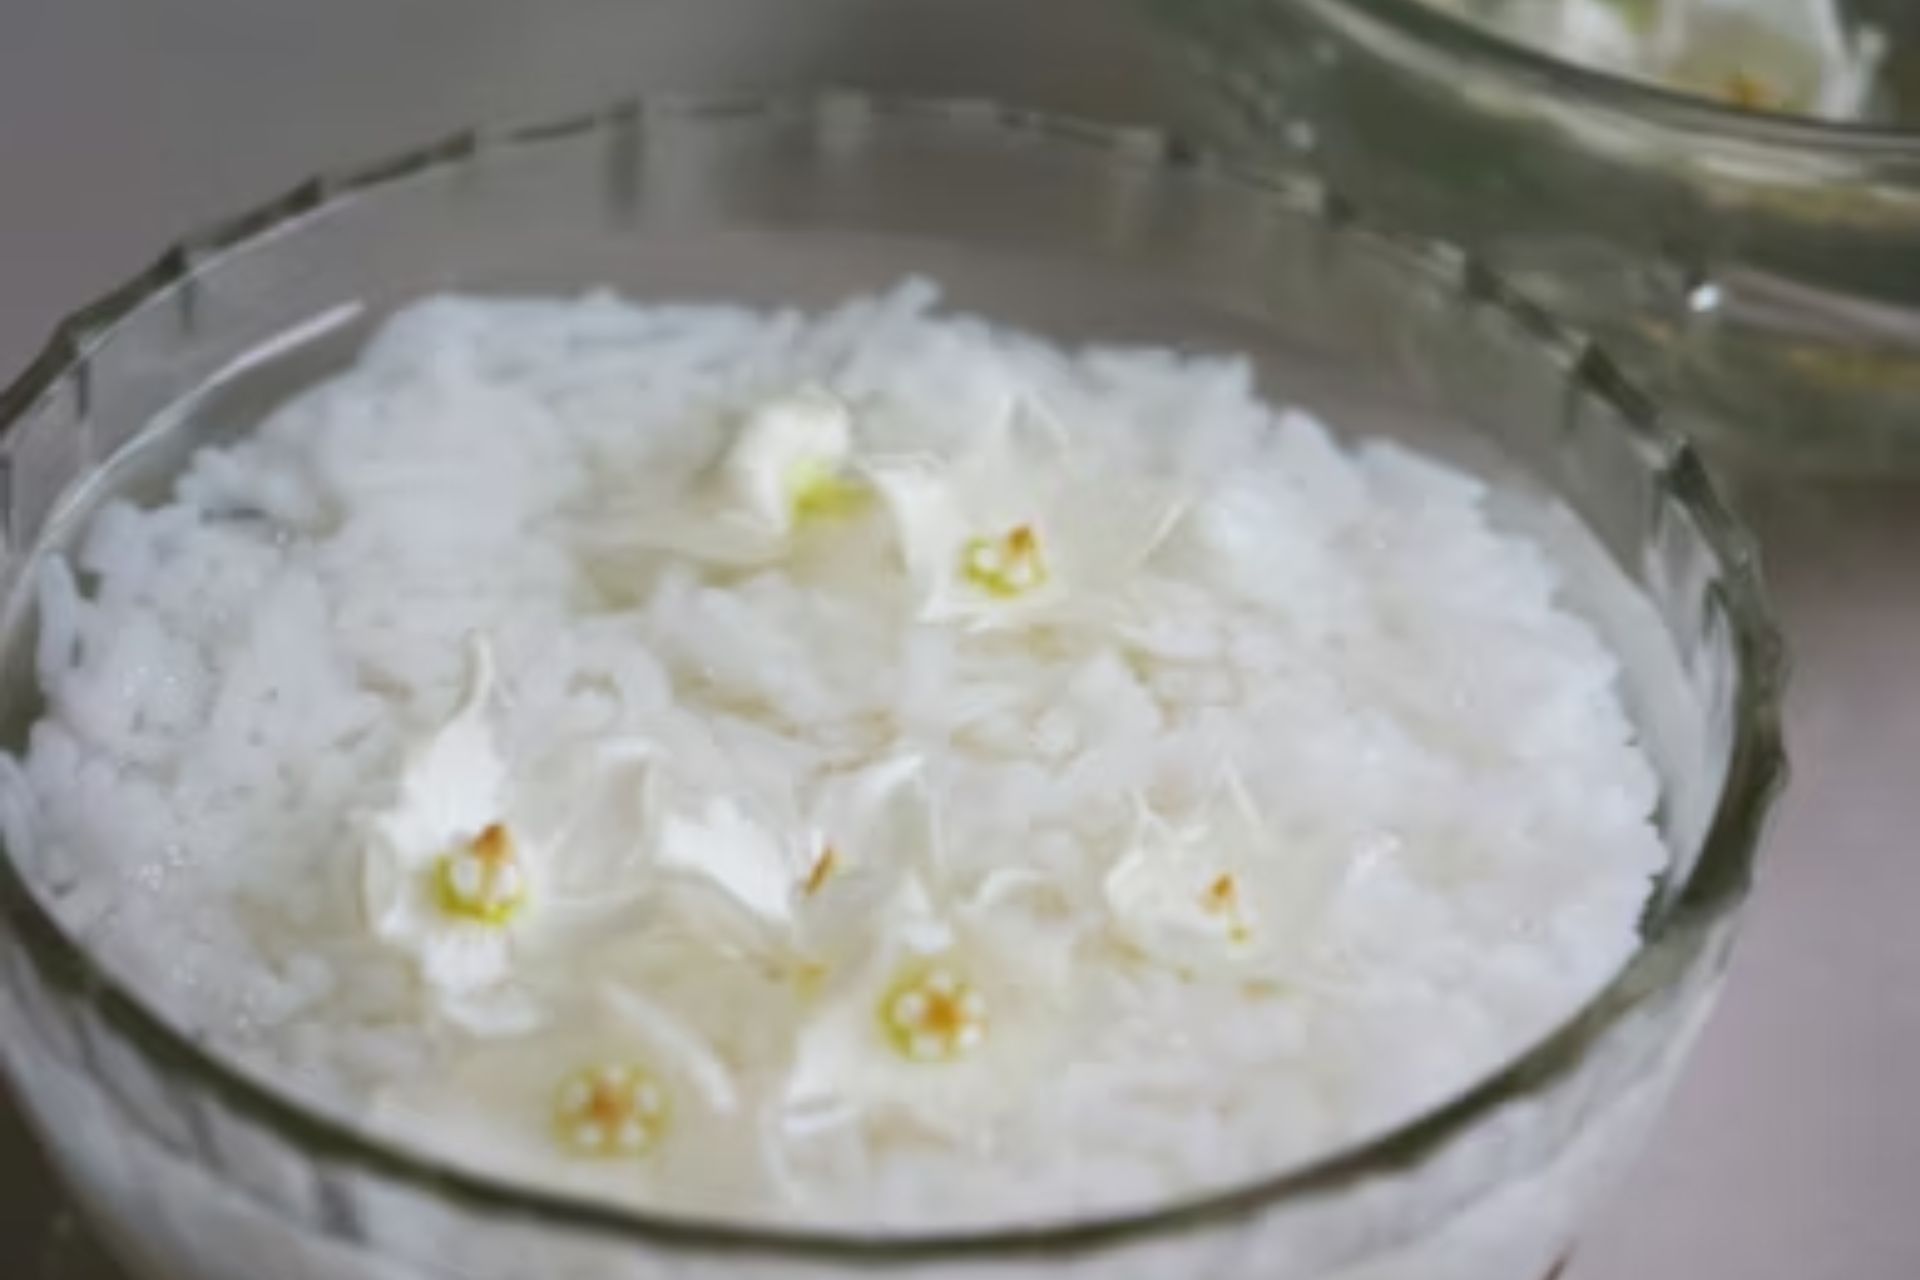 The image features a glass bowl of white rice, which is the perfect way to soak it and create rice water for skin.